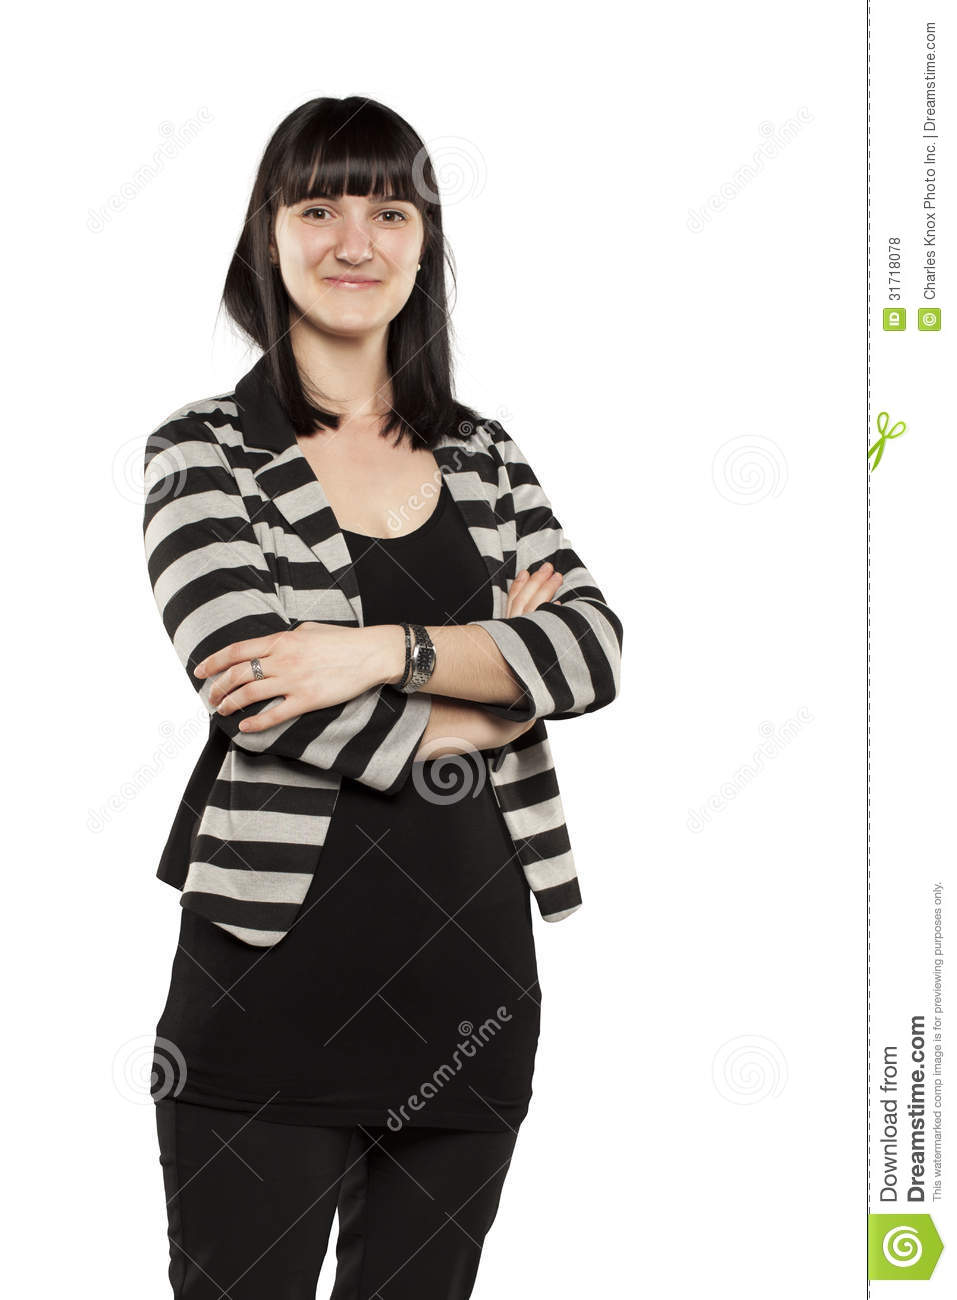 Young Woman In Professional Attire Royalty Free Stock Photos   Image